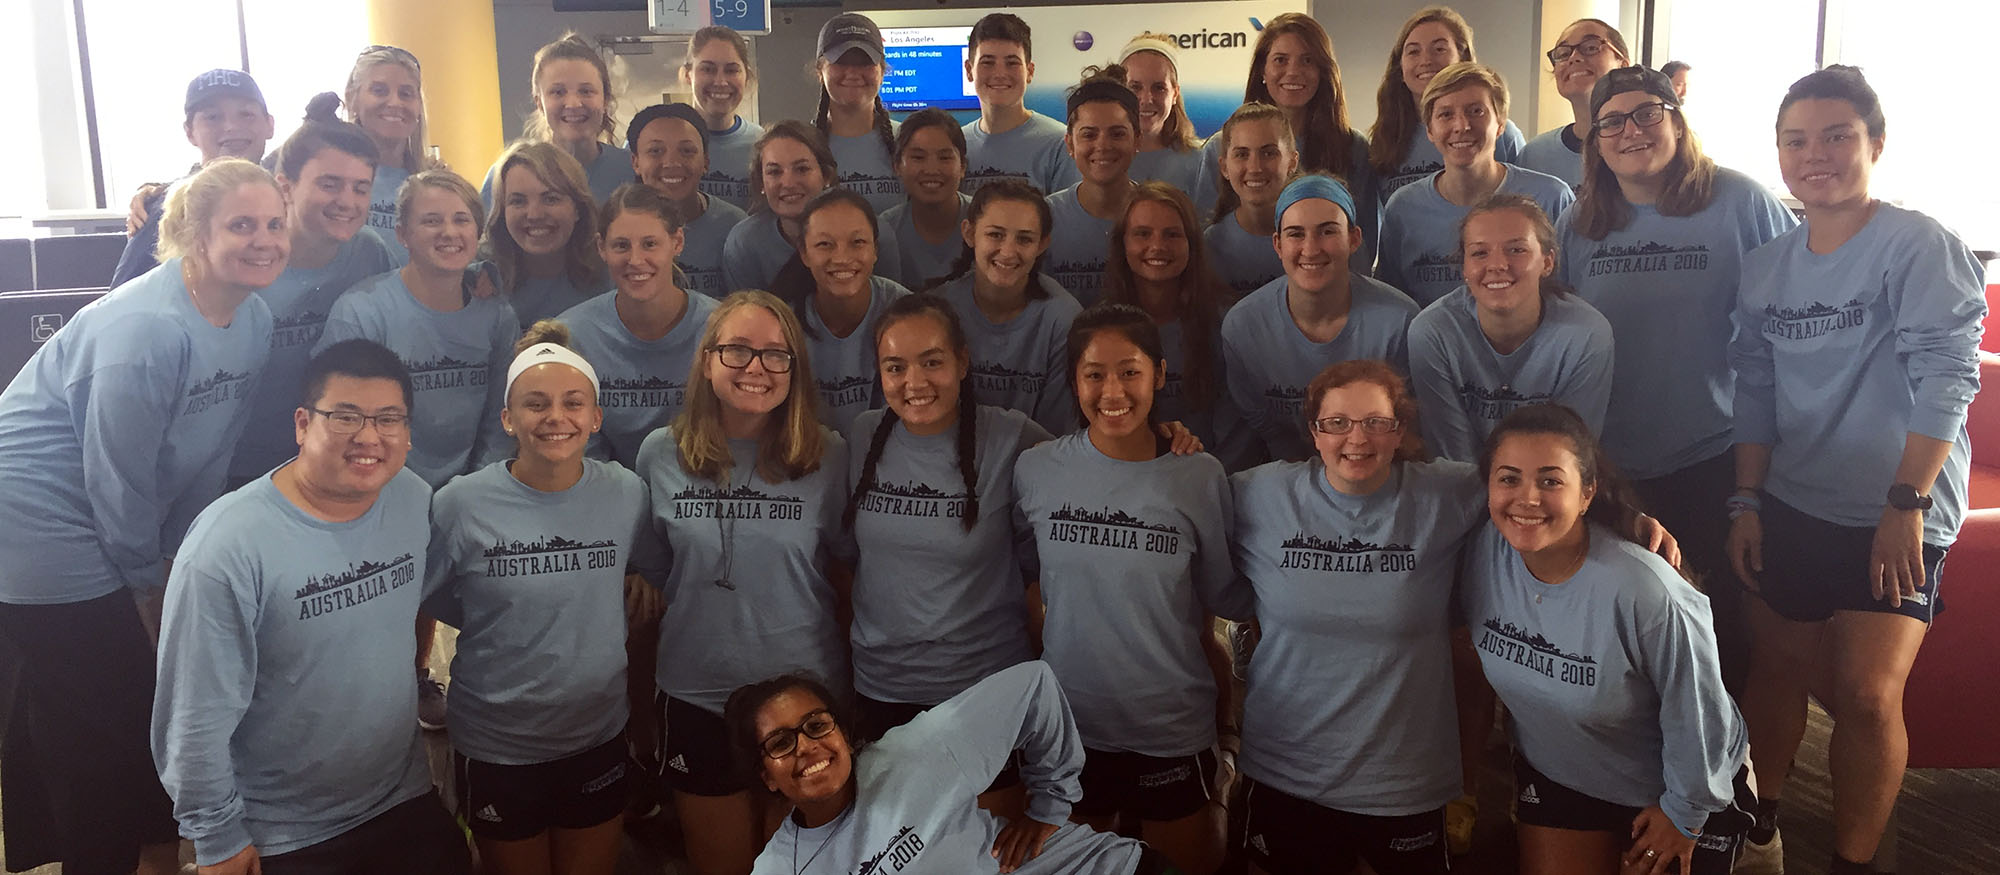 The Lyons field hockey team gathers for a photo prior to their departure to Australia from Boston's Logan Airport on Sunday, August 19th, 2018.